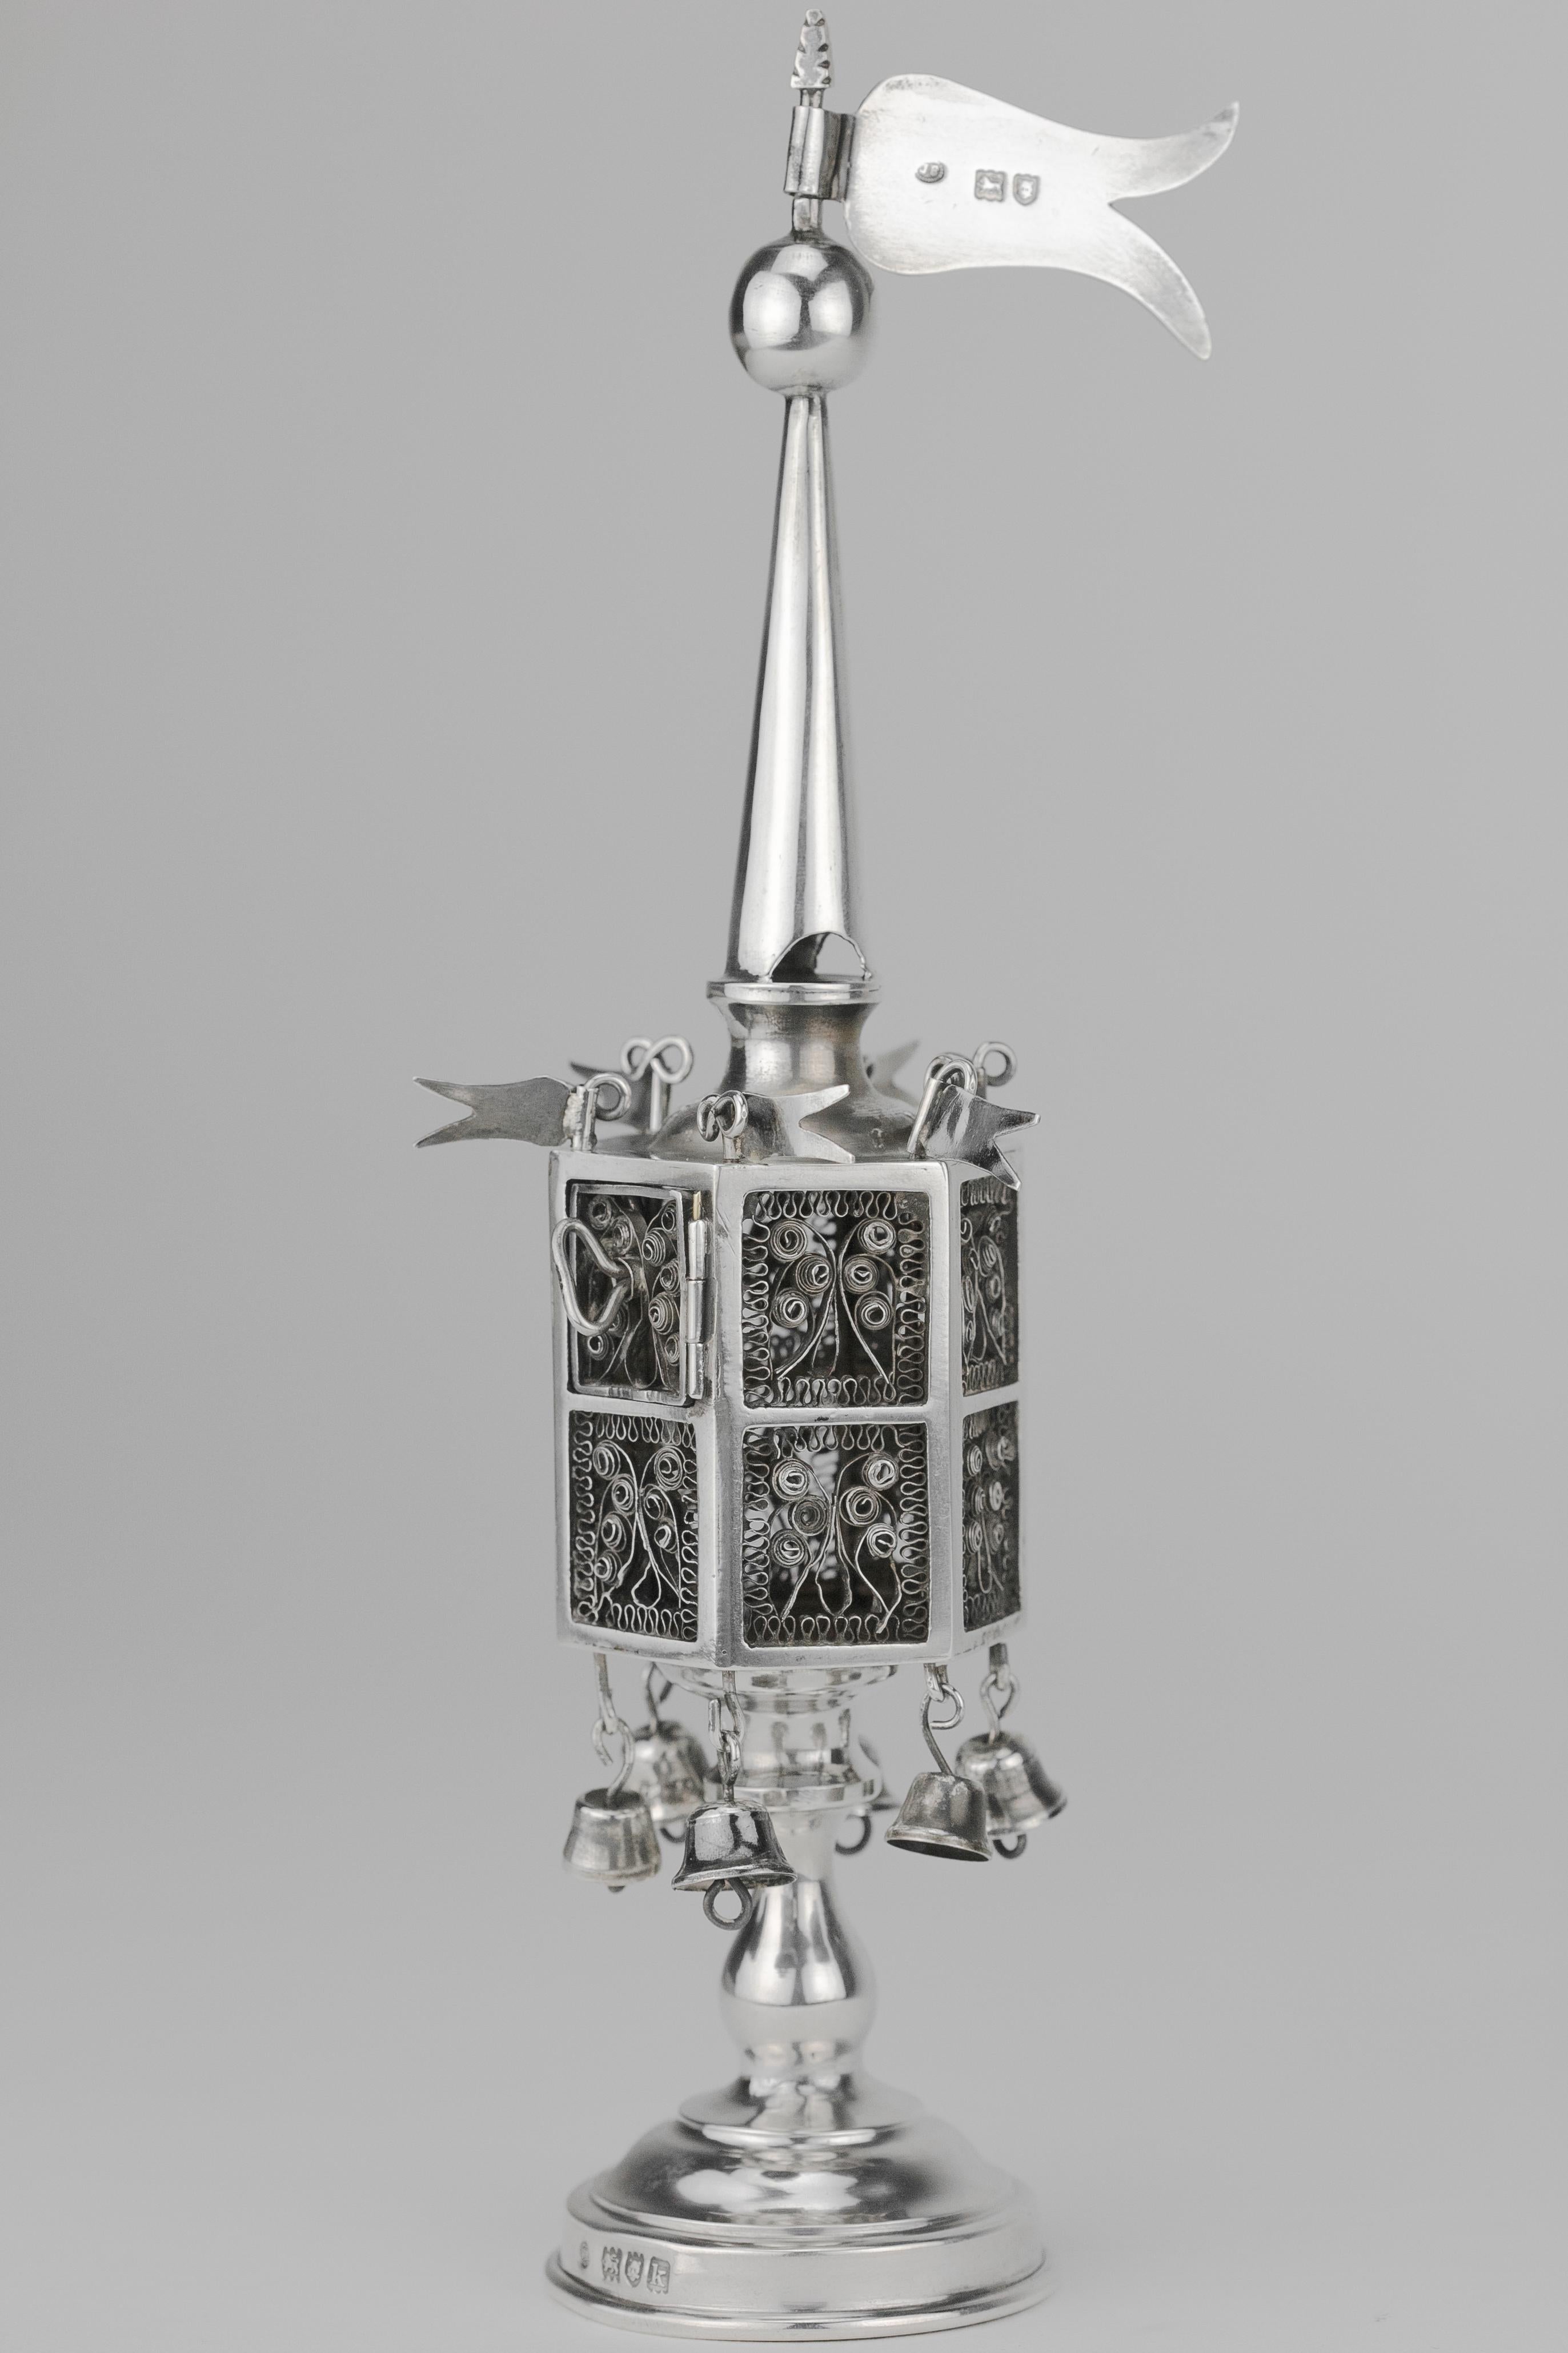 Sterling silver spice tower, by Jacob Fenigstein, Birmingham, England, 1909.
The hexagonal, silver filigree openwork body is fitted with hinged door, six hanging bells and six pennants, topped by a spire, knop and pennant and standing on round base.